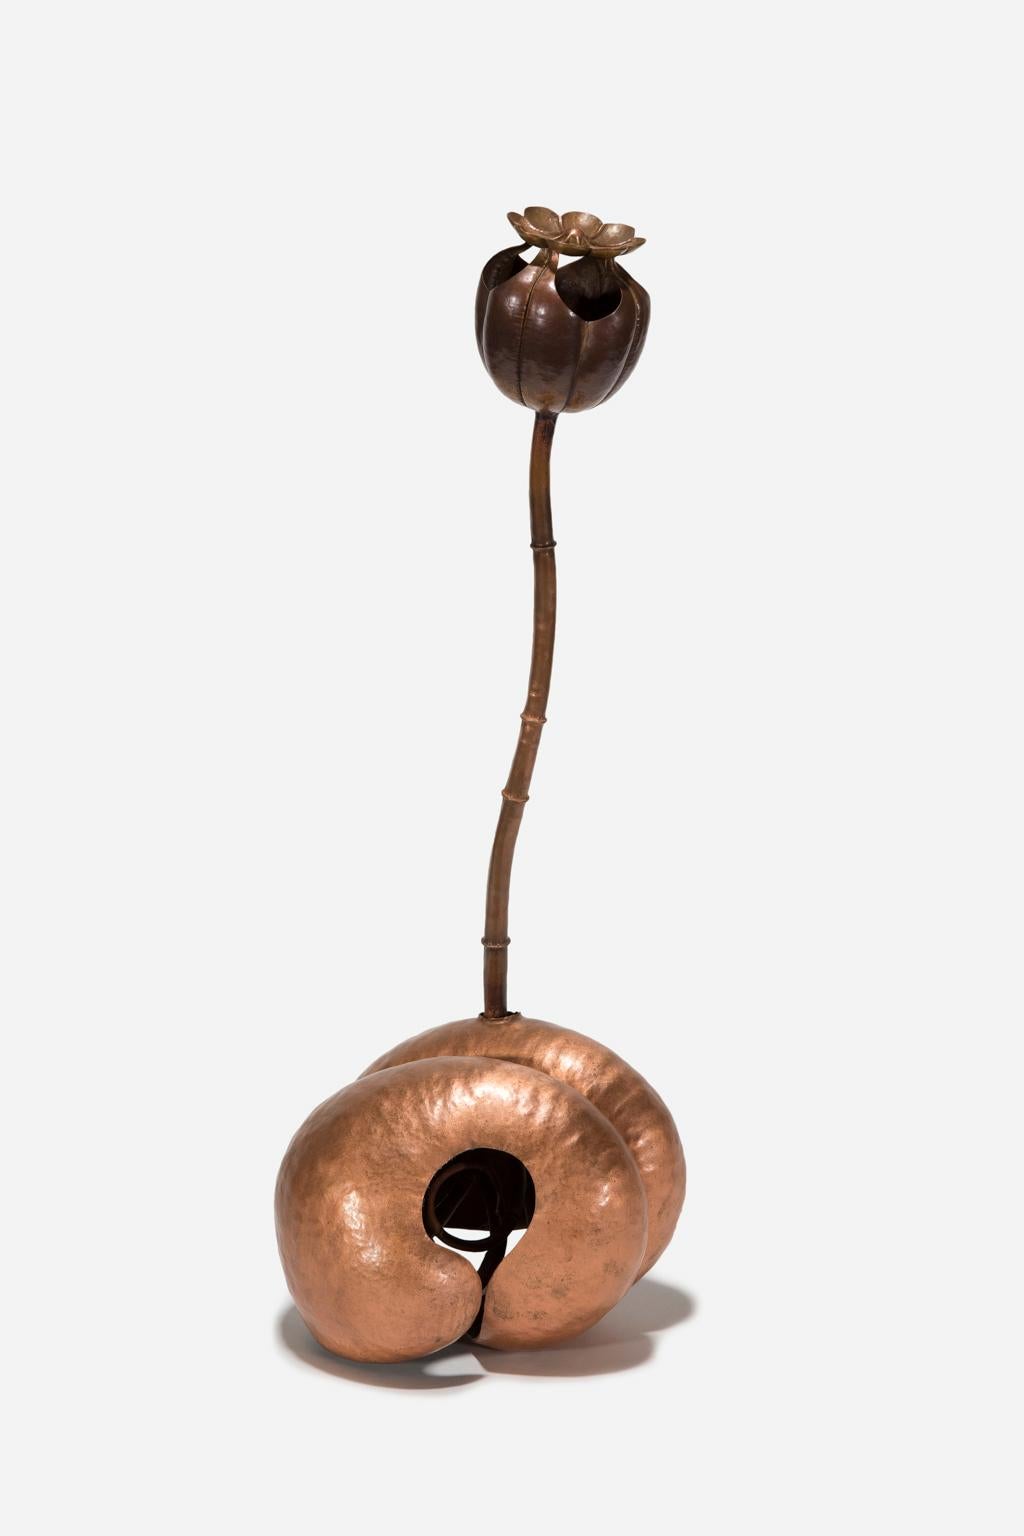 Kai Wolter Abstract Sculpture - "Cephalic" Hammered Copper, Organic Shape, Naturalistic